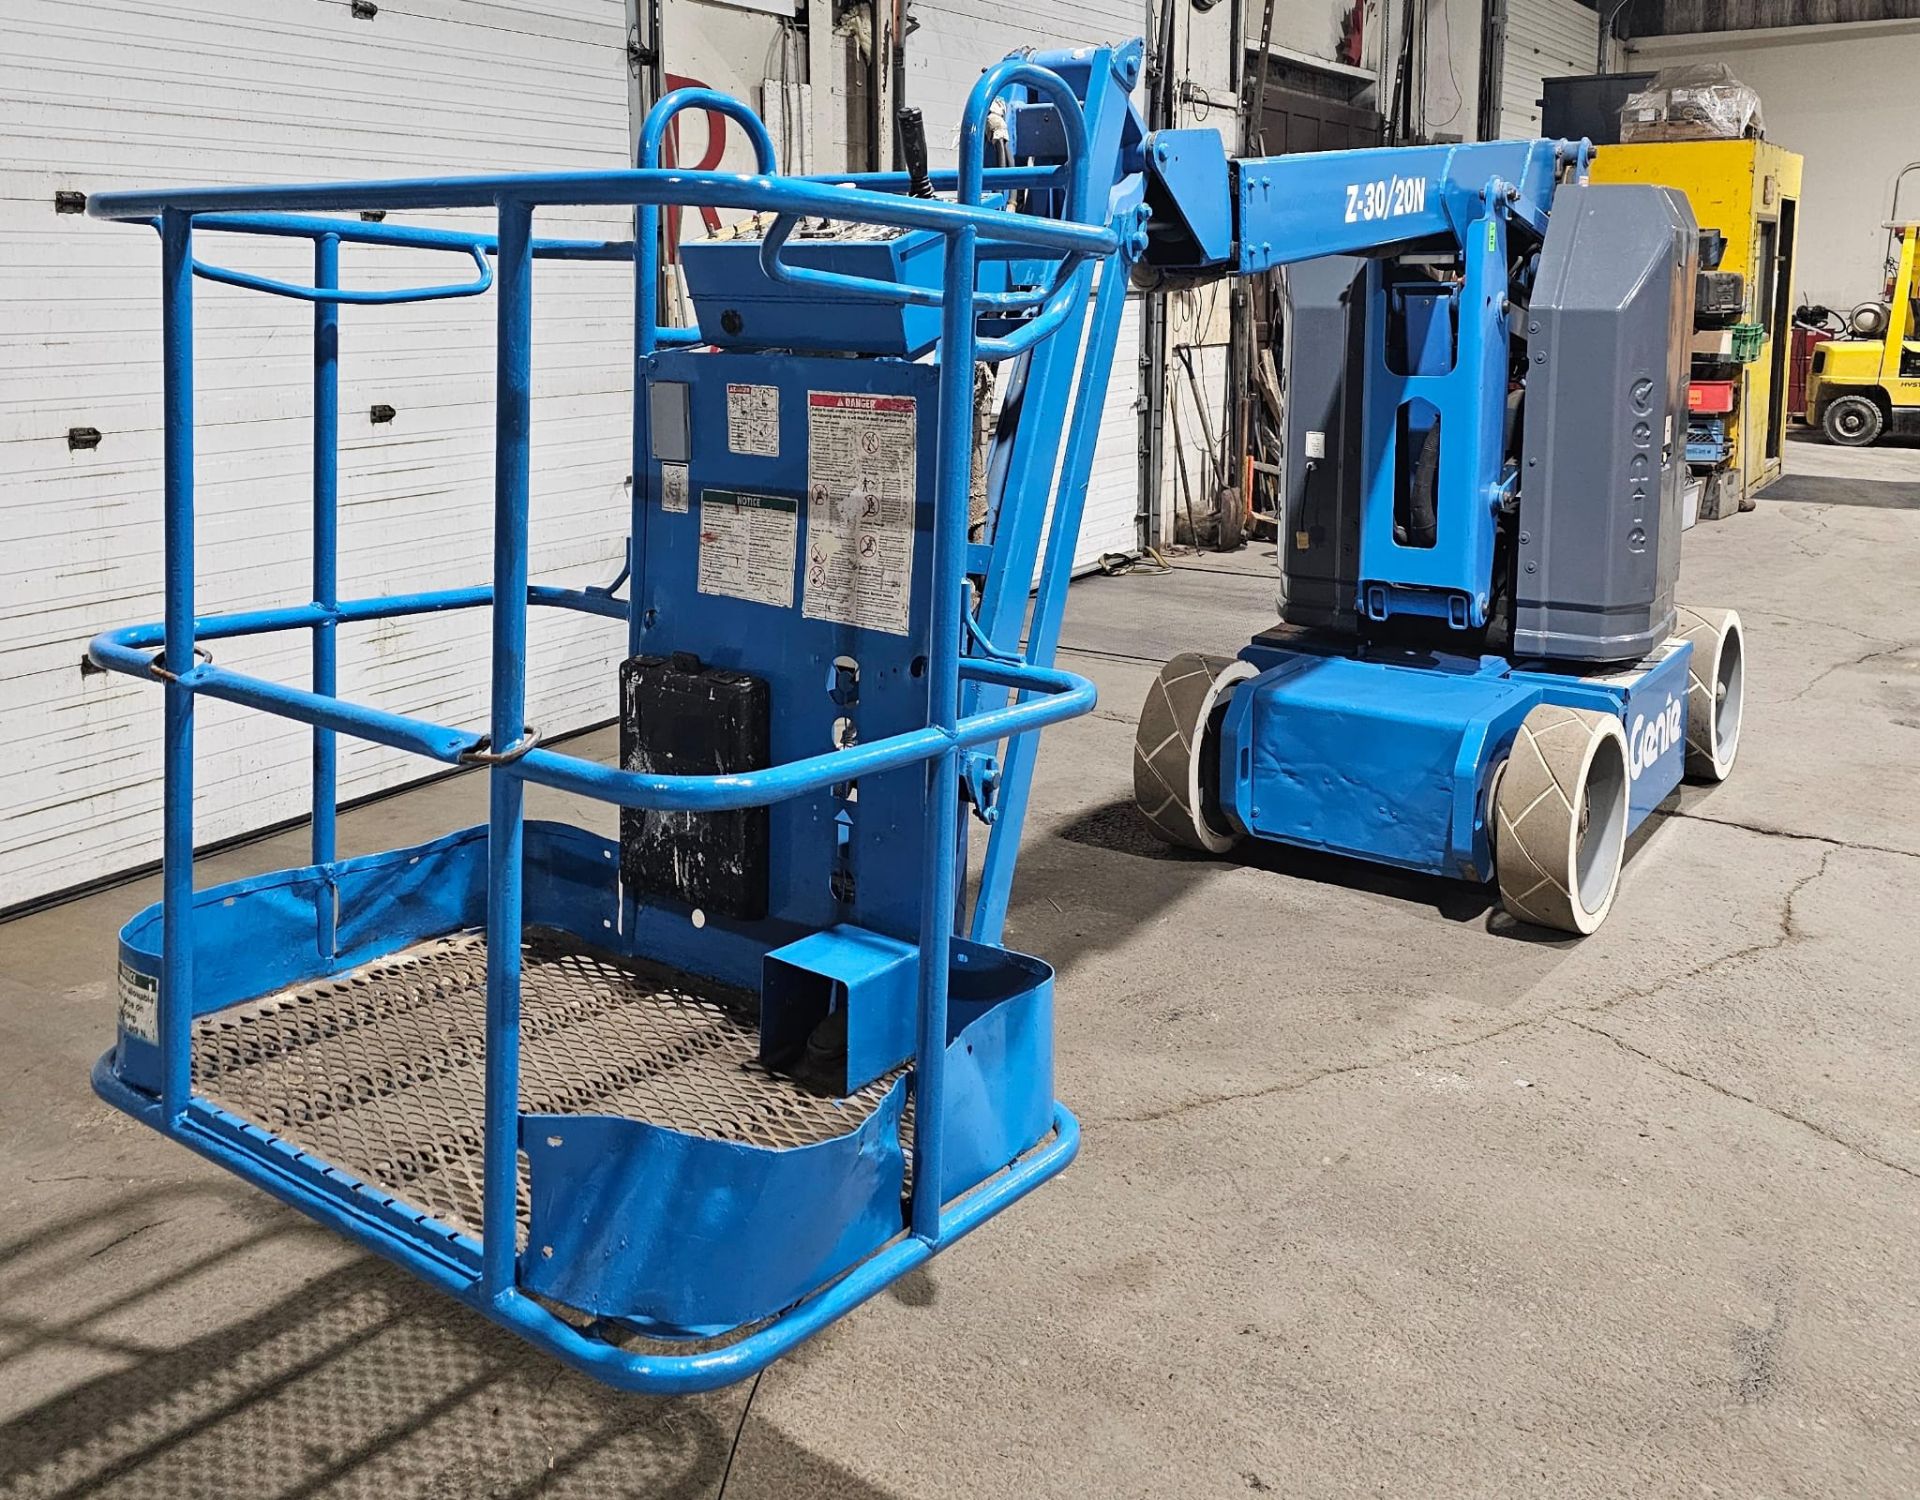 Genie model Z-30/20N Zoom Boom Electric Motorized Man Lift 30' Height & 21' Reach - with 24V Battery - Image 7 of 9